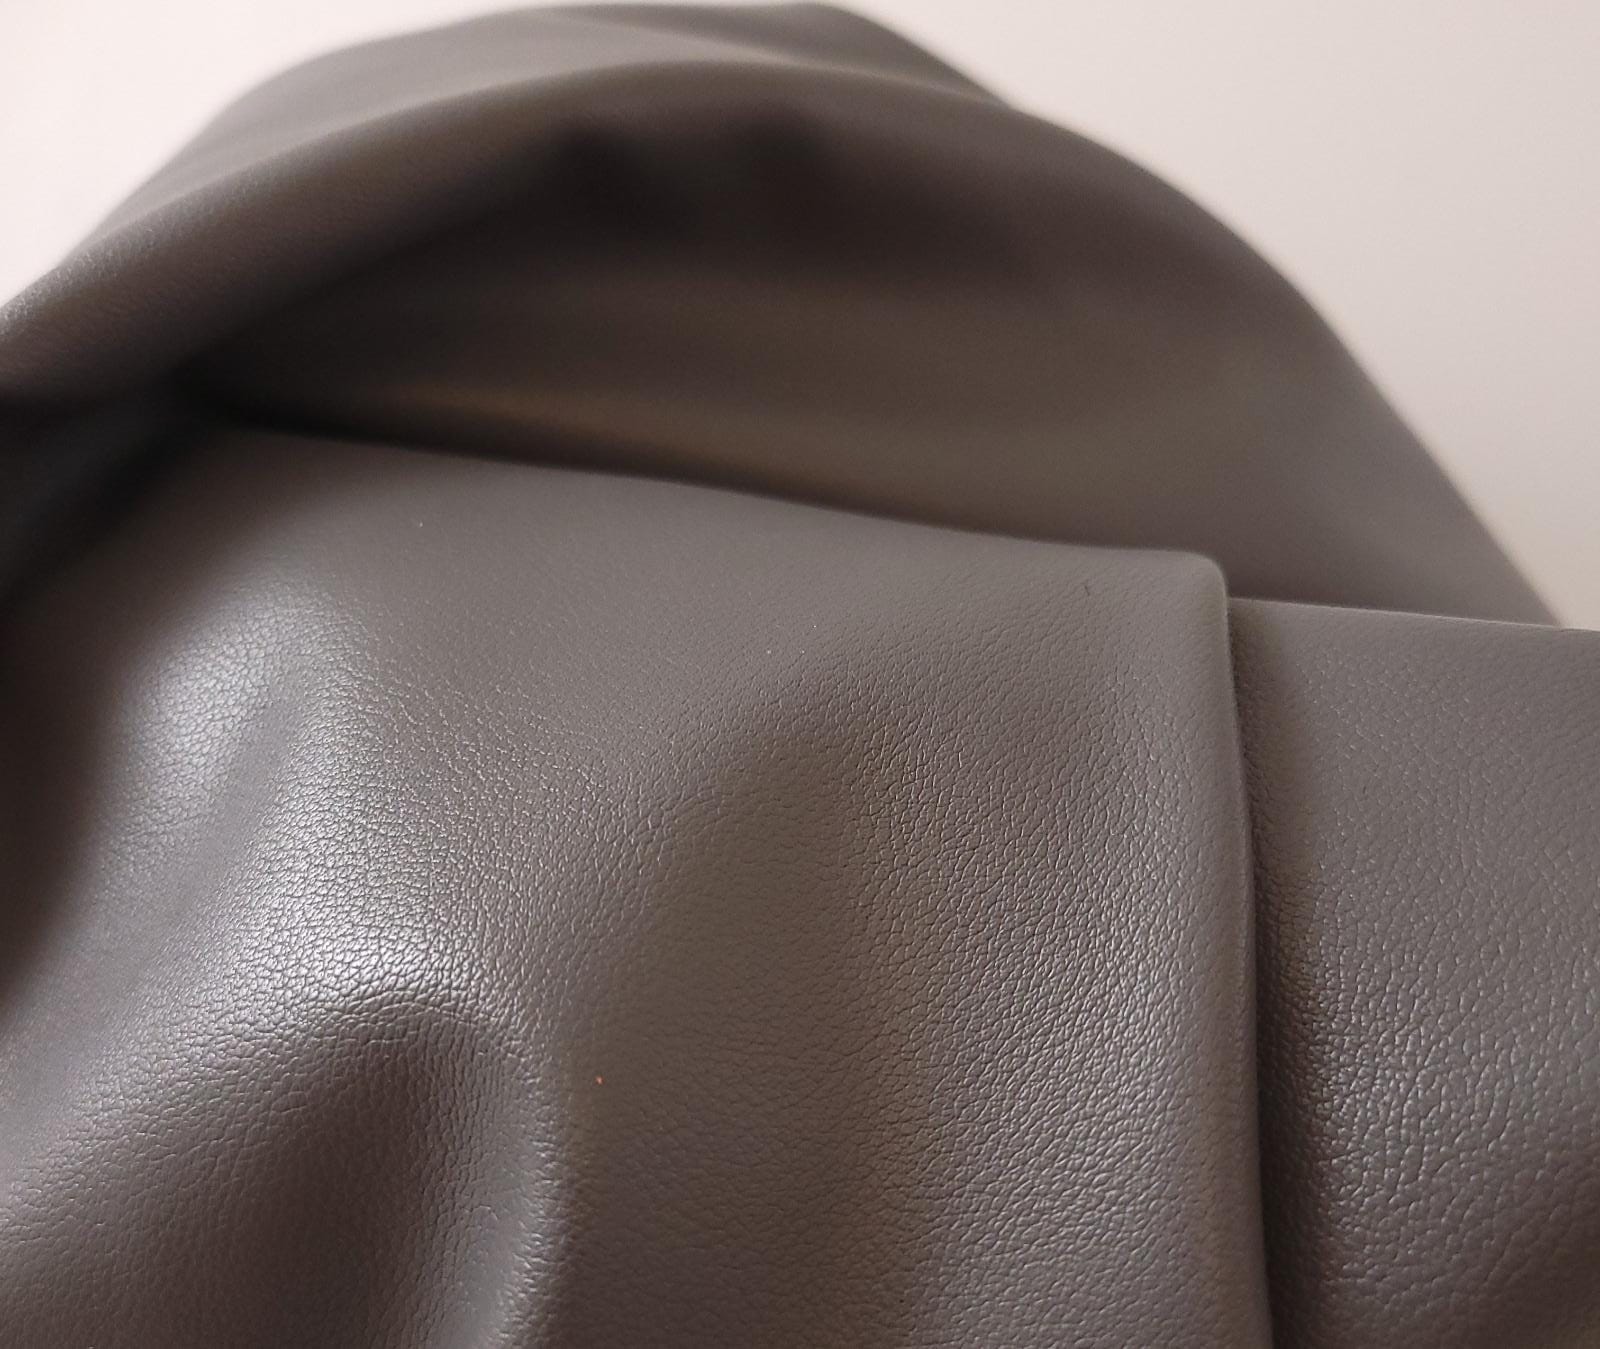  Faux vegan leather by the yard sheets distressed leather fabric for upholstery 30,000 Double Rubs vinyl sheets nappa leather crafts bookbinding books furniture fabrics uphilstery fuax material pu pleather faiux learher cruelty free nappa seat dark gray soft